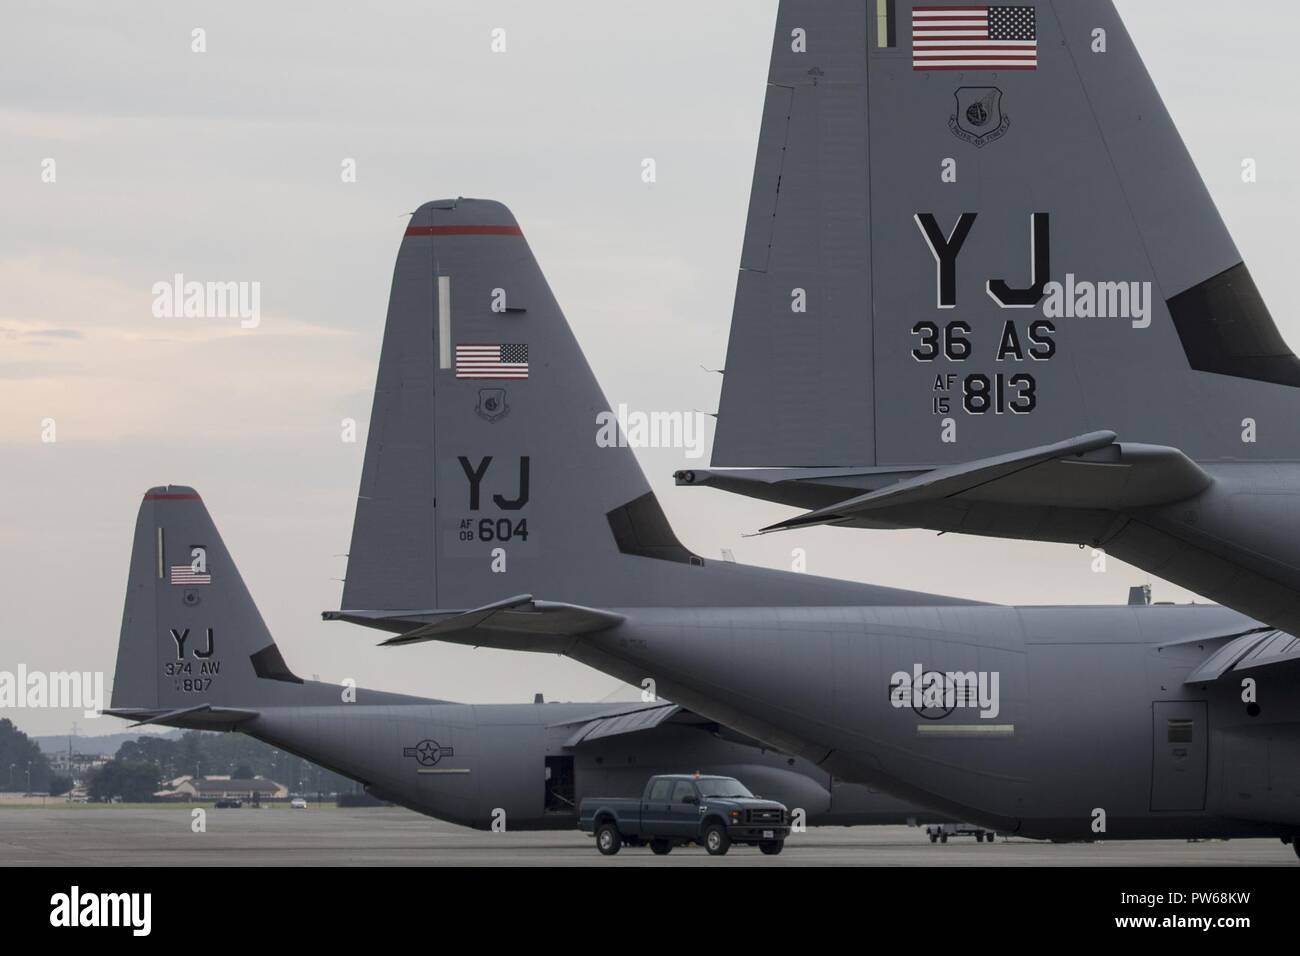 Three C-130J Super Hercules’ sit on the flightline at Yokota Air Base, Japan, Sept. 20, 2017. The C-130J shown in the middle is the fifth to be delivered to Yokoa and the first from Ramstein Air Base, Germany. Crewmembers from the 36th Airlift Squadron flew halfway around the world to deliver this aircraft here. Yokota serves as the primary Western Pacific airlift hub for U.S. Air Force peacetime and contingency operations. Missions included tactical airland, airdrop, aeromedical evacuation, special operations and distinguished visitor airlift. Stock Photo